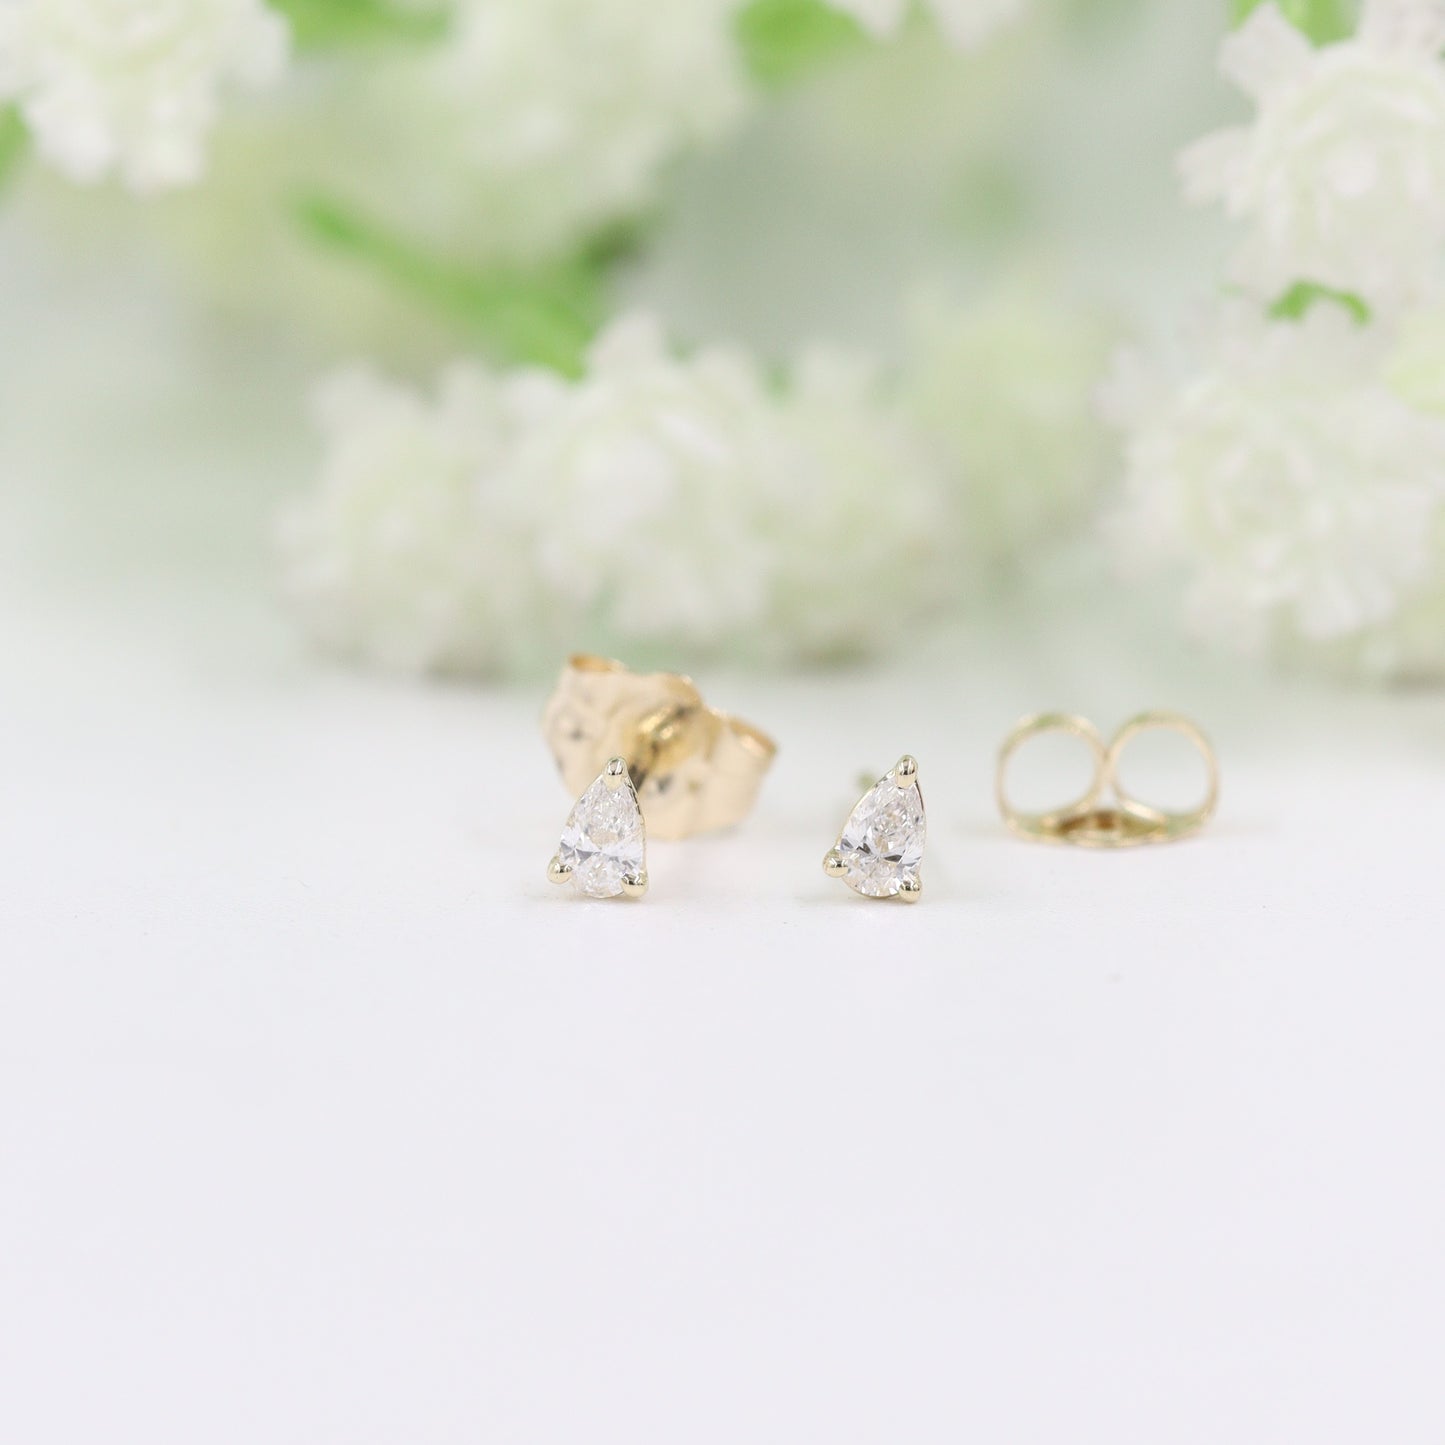 Solitaire Natural Pear Diamond Earring/Three Prong Set Pear Diamond Earrings/Solitaire Stud Earrings/Dainty Simple Earrings/Gifts for her